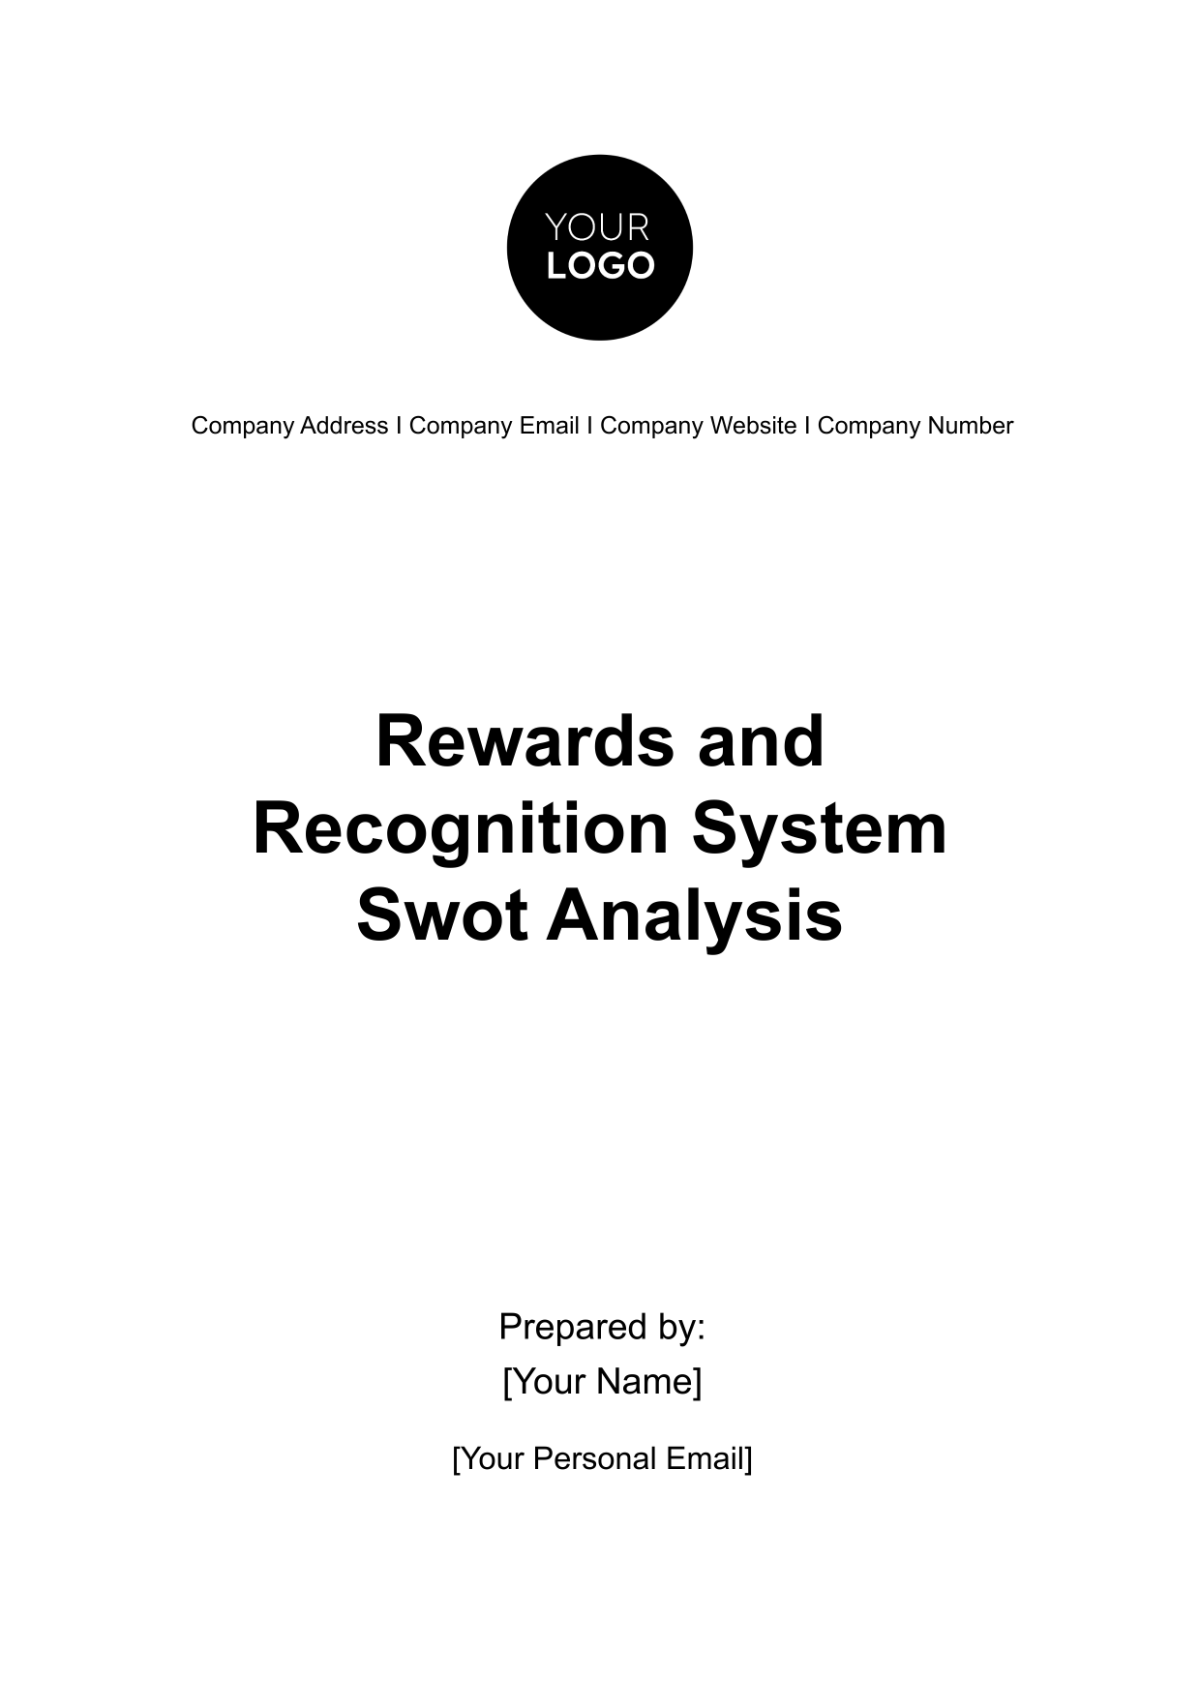 Free Rewards and Recognition System SWOT Analysis HR Template